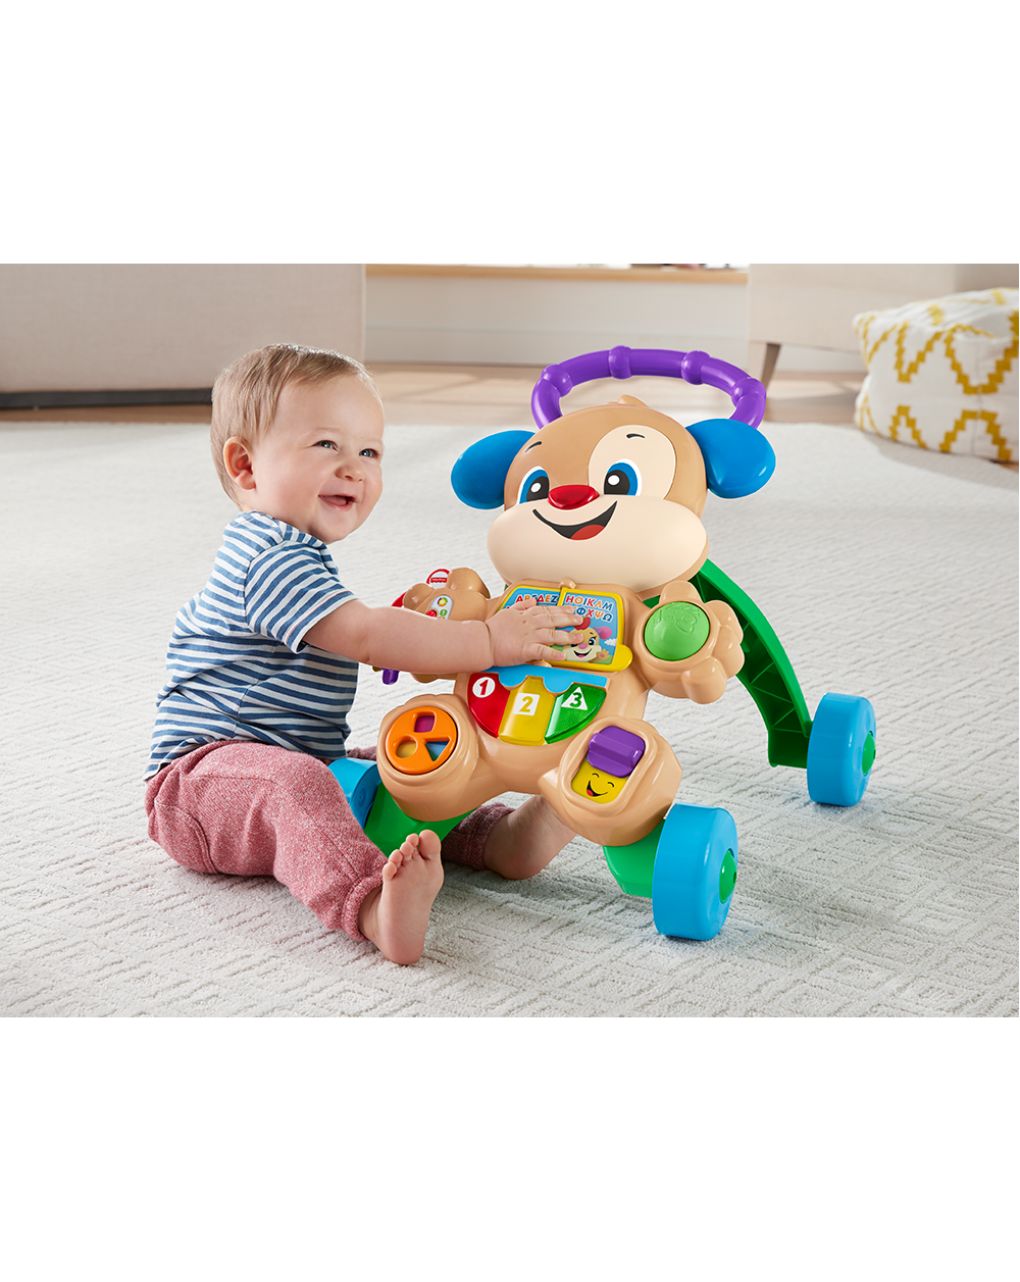 Fisher-price εκπαιδευτική στράτα σκυλάκι smart stages ftc66 - Fisher-Price